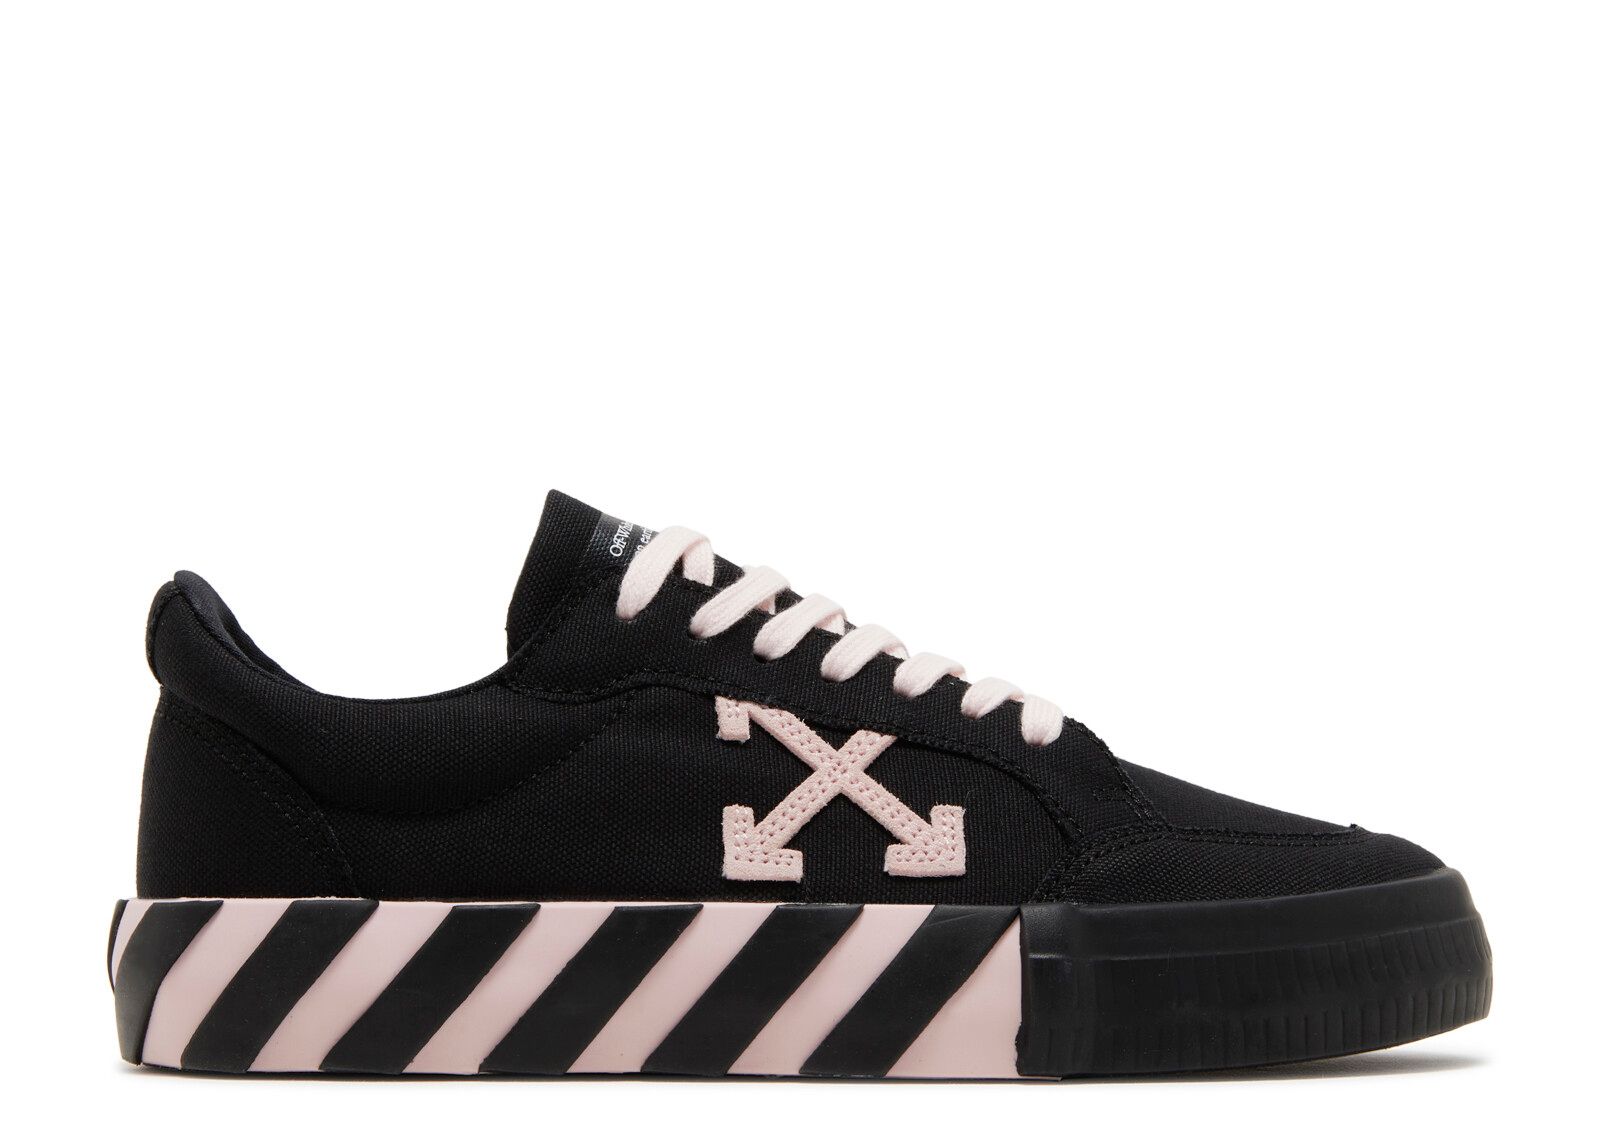 Off White Wmns Vulc Sneaker 'Black Pink' - Off White - OWIA272S23FAB002 ...